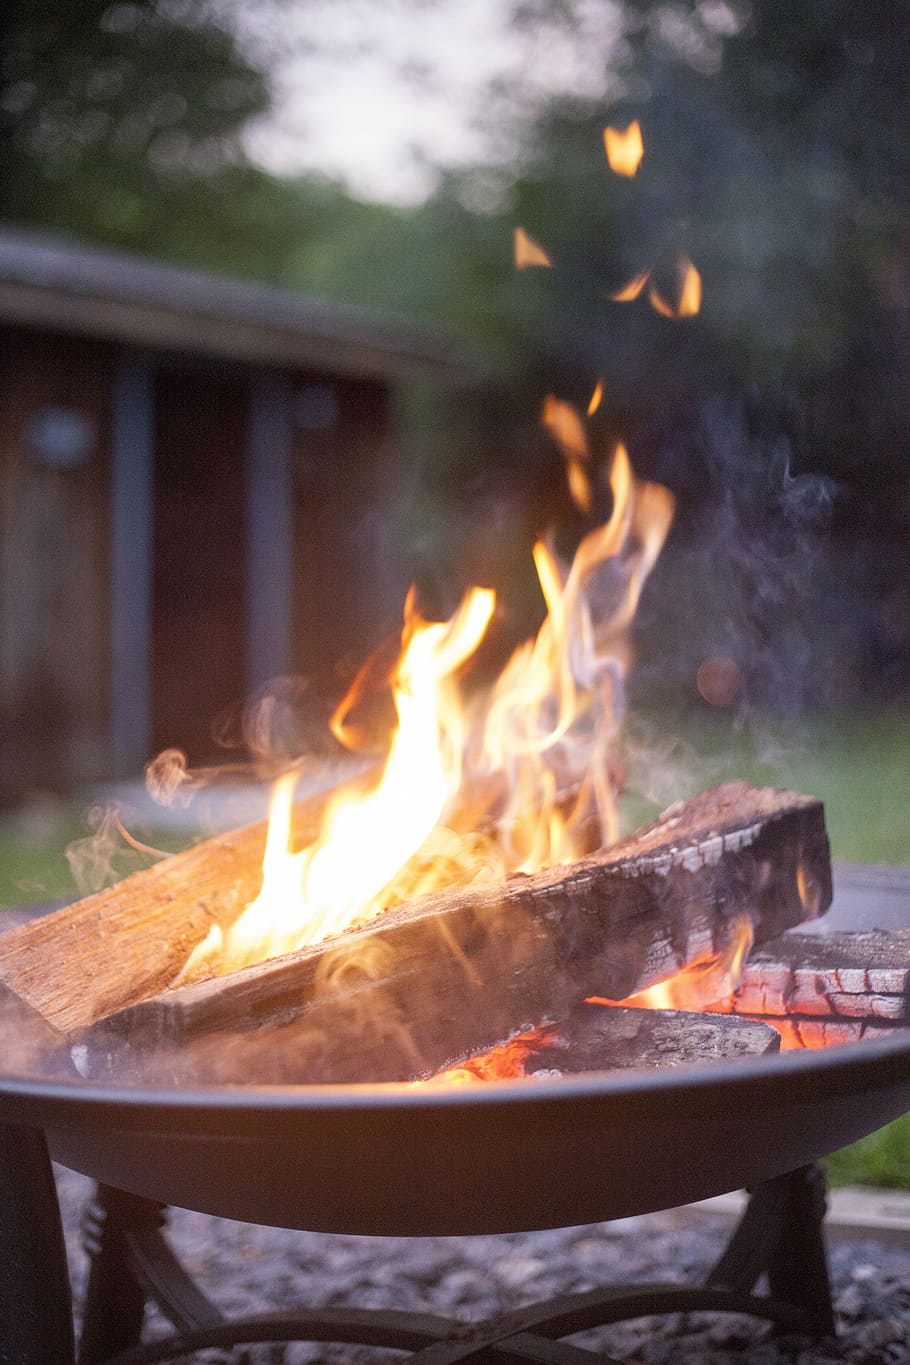 brown, firewood, burning, fire pit, daytime, camping, fire, firepit, night, woods